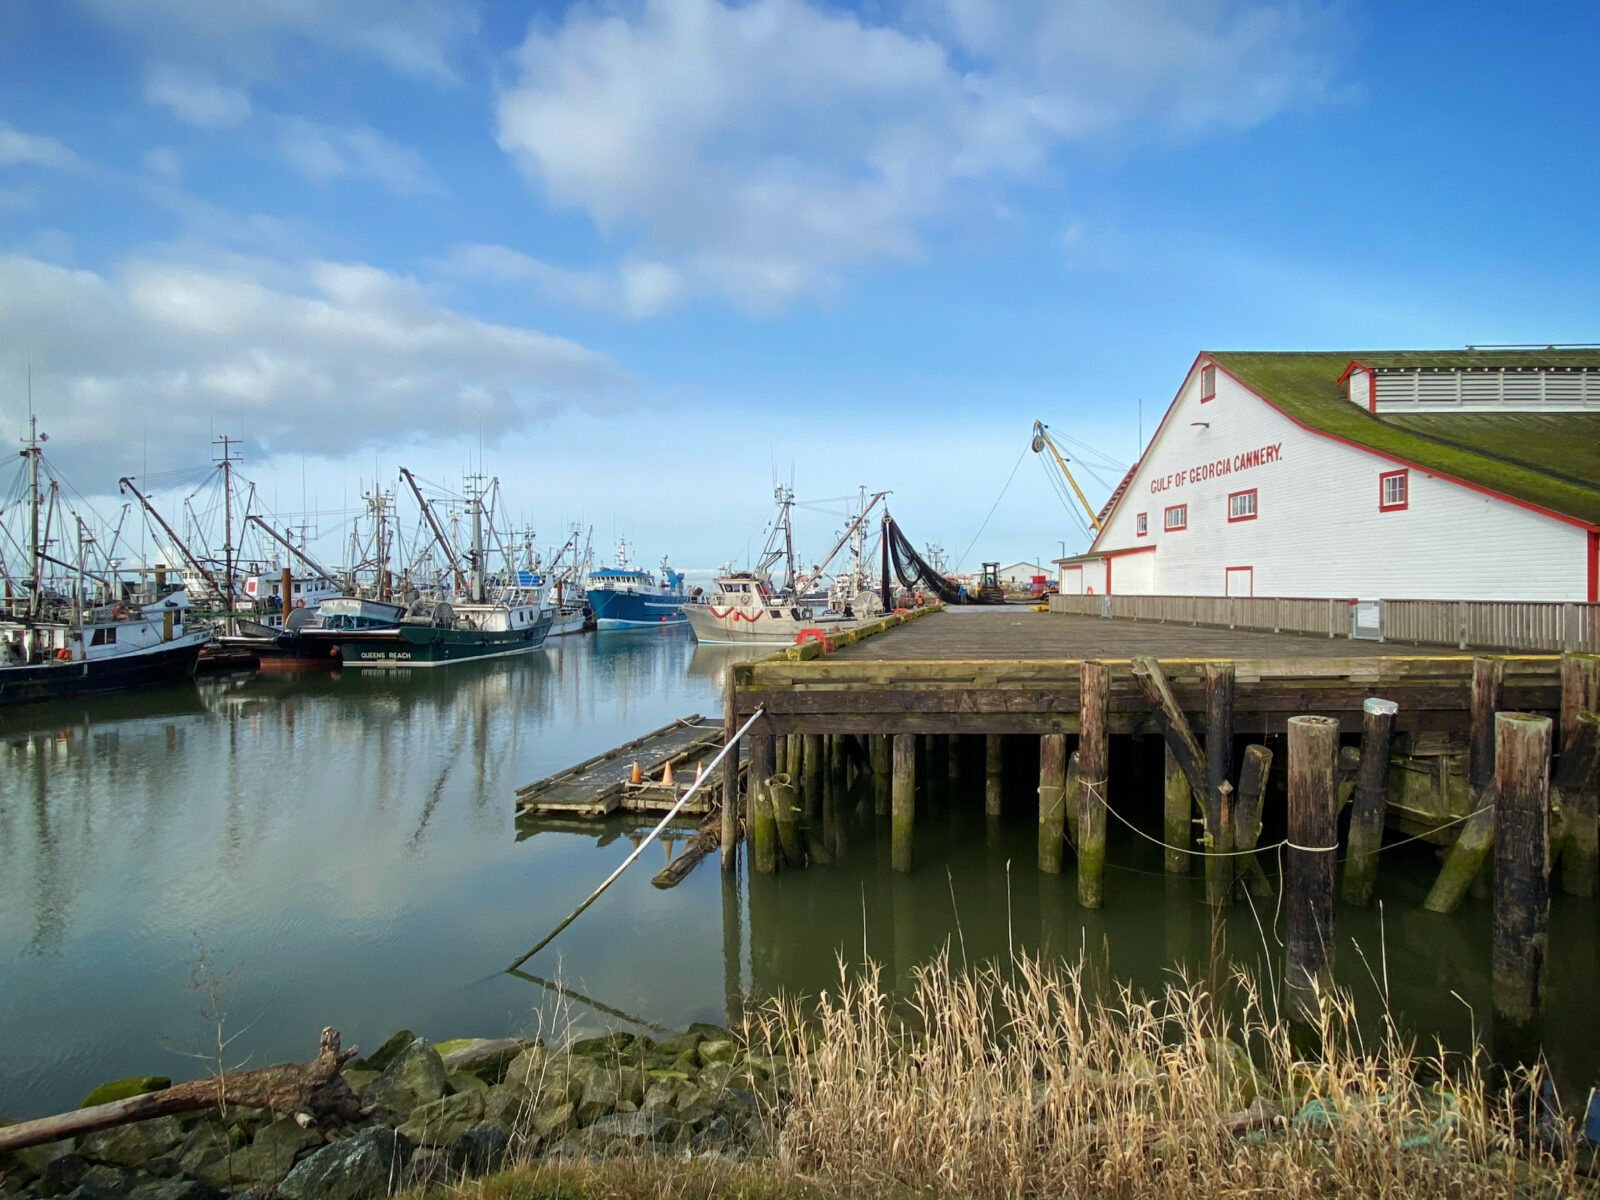 View of the Gulf of Georgia Cannery National Historic Site from Steveston Harbour